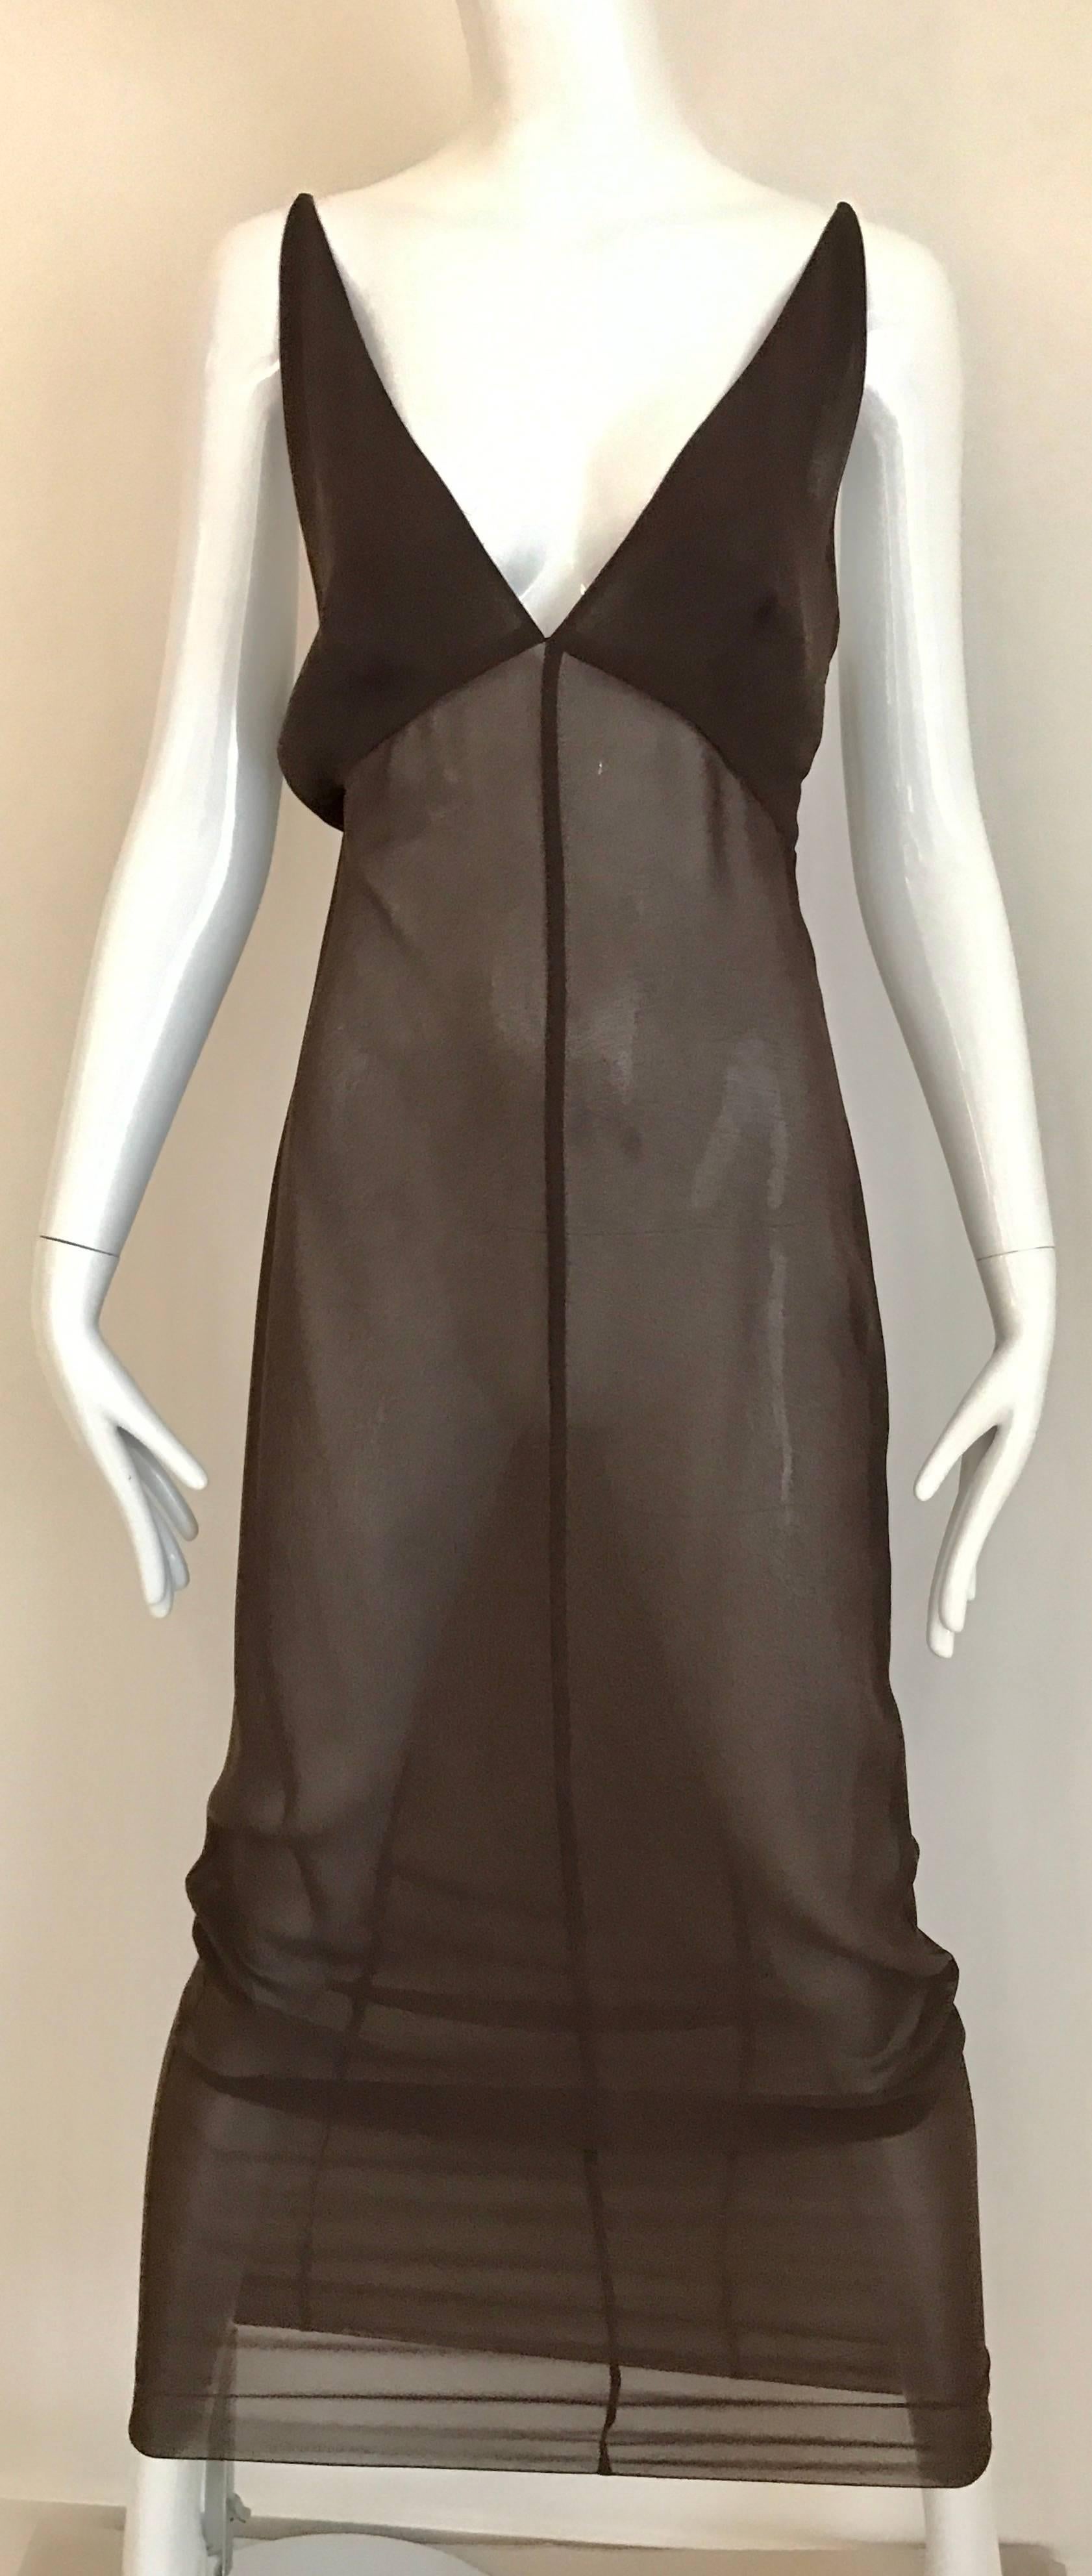 Very Unusual Vintage CHANEL Crepe Spaghetti Strap V neck  dress with sleeveless long Vest. This ensemble can be worn so many ways. ( see images provided)
Dress measurement Bust 32-34 inch / Waist 30 inch/ Hip 34 inch/Length 58inch
Long Vest : 34